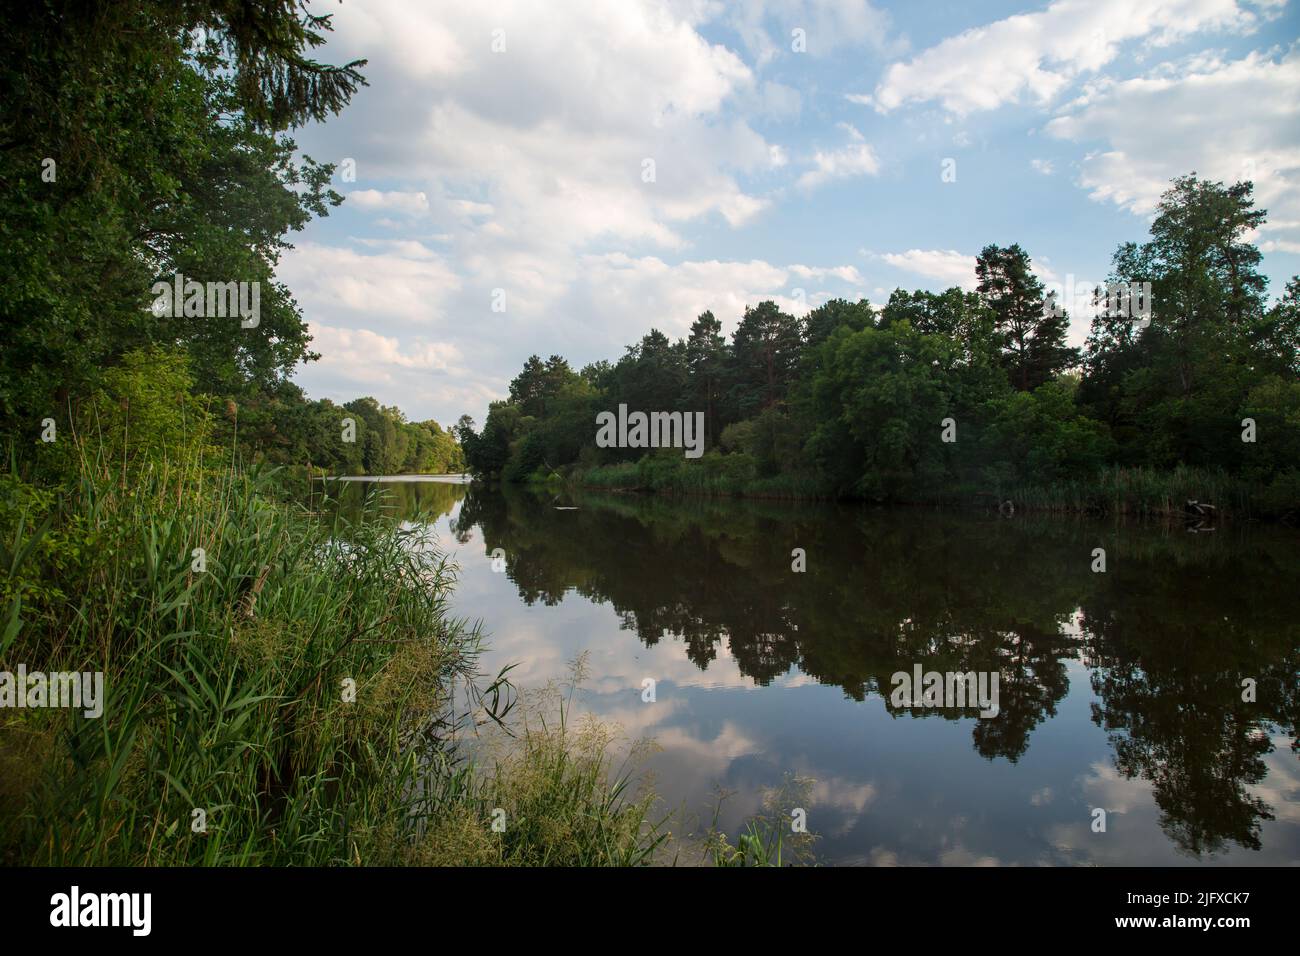 The Neisse river at sunset, photographed from the side of Poland Stock Photo